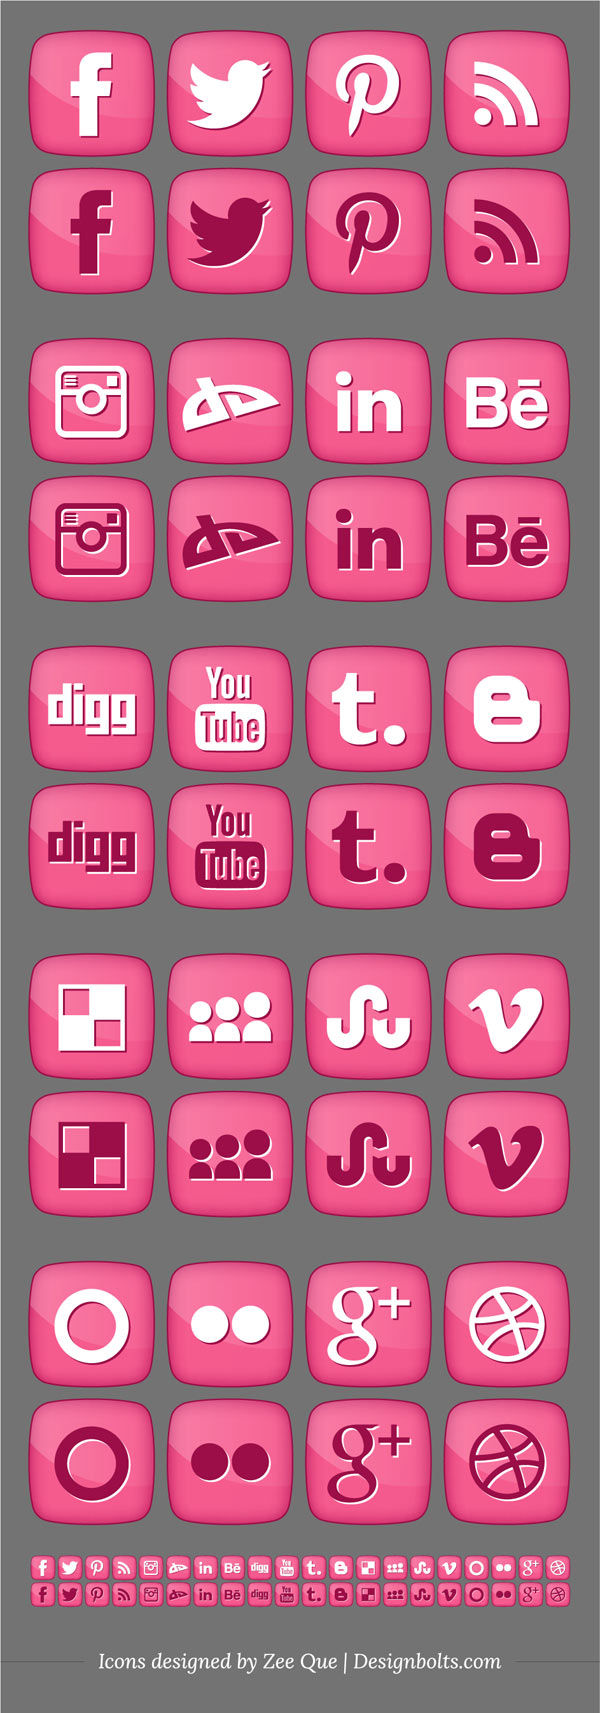 Free-Pink-Girly-Social-Media-Icons-2012-by-desigbolts